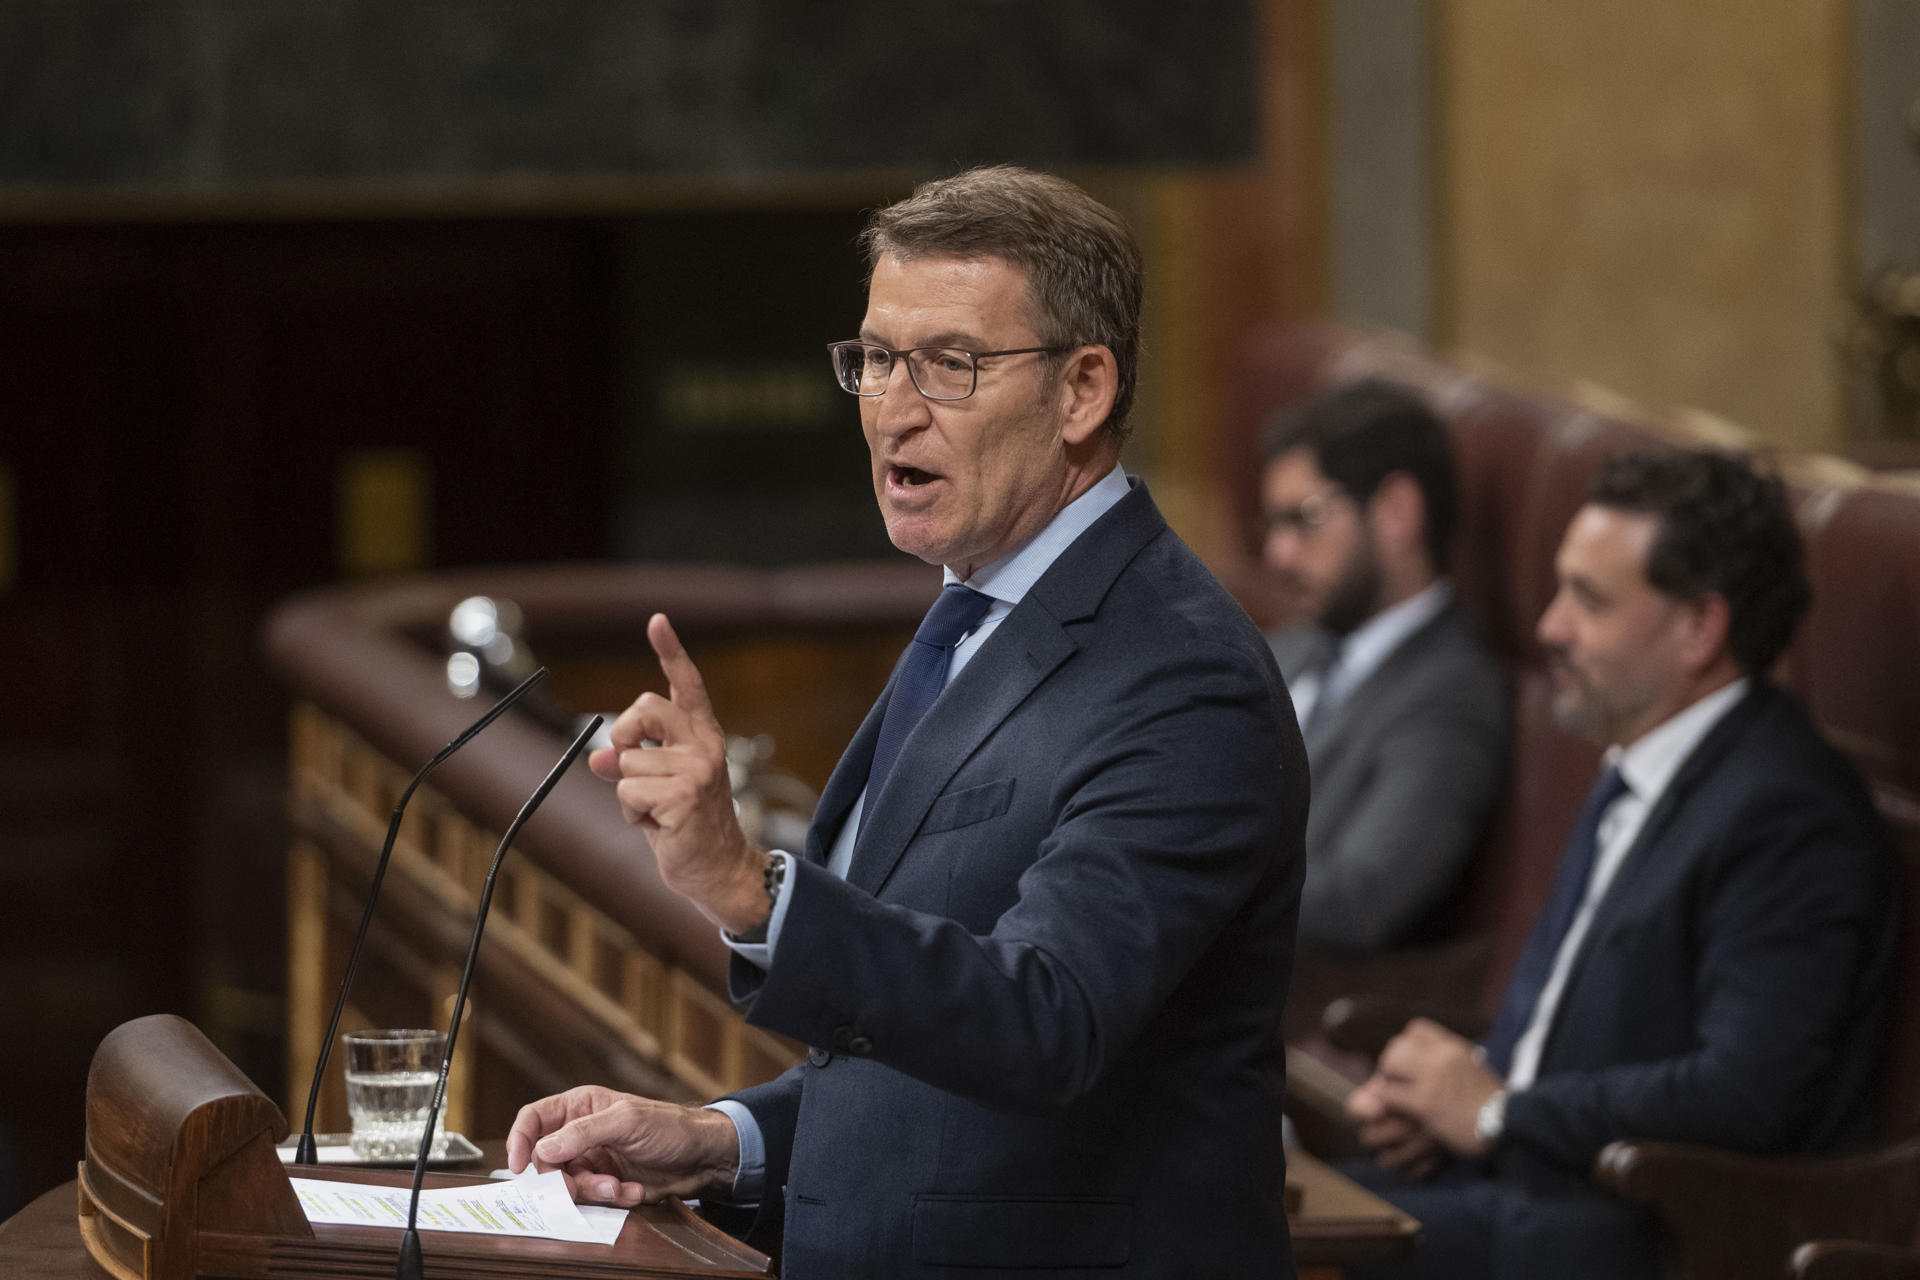 Spanish MPs make comparisons to Tejero and Mussolini in mud-slinging debate on amnesty bill